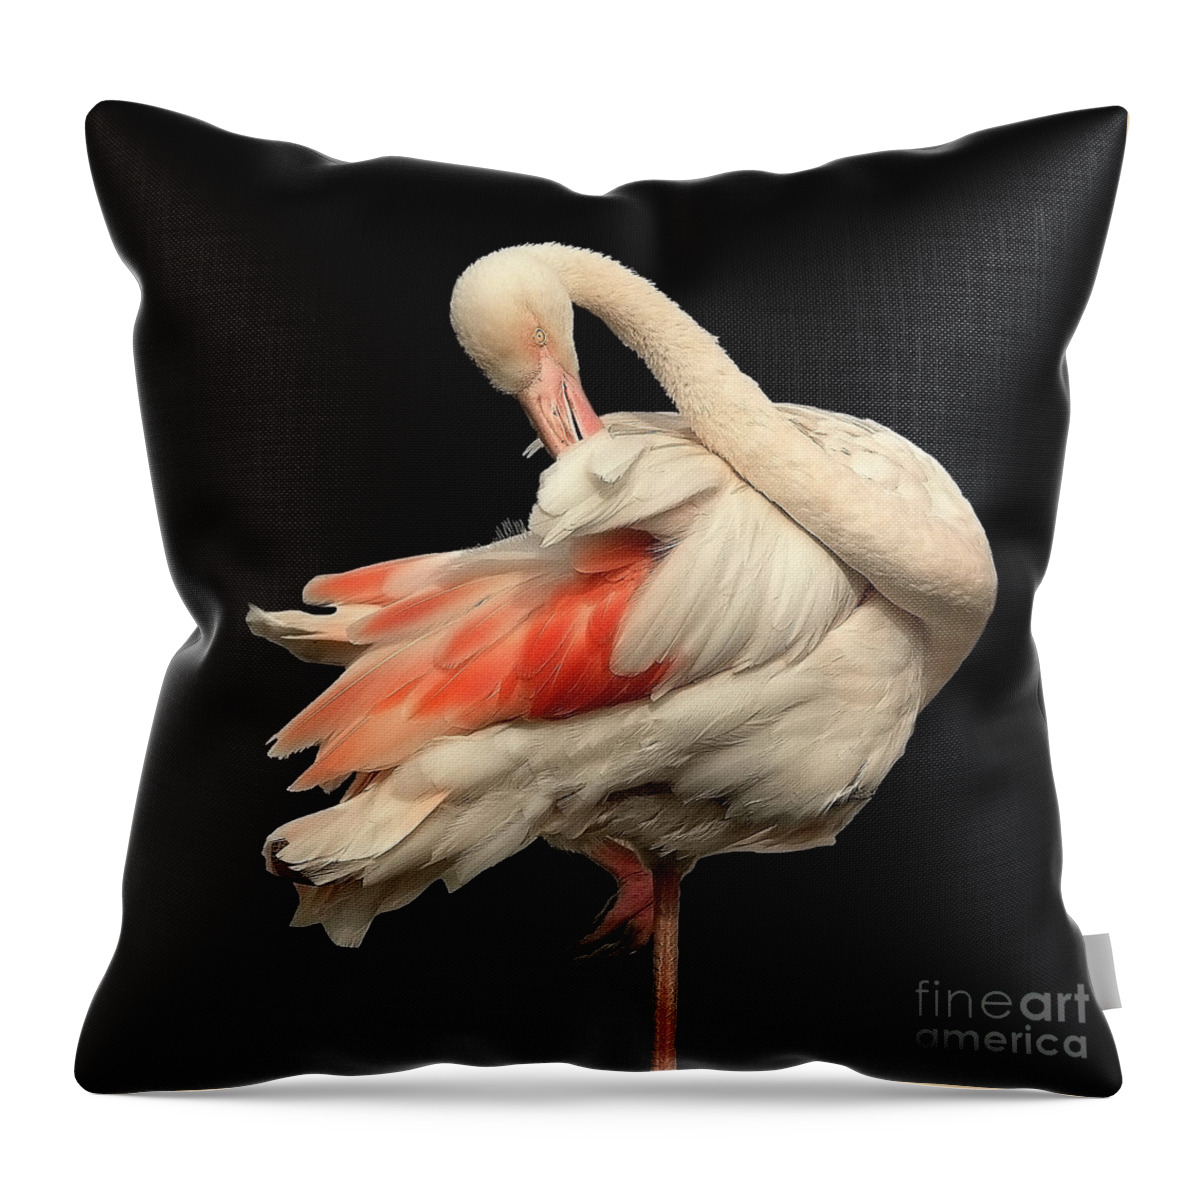 Flamingo Posing Ballerina Gentle Delicate Red Black Flexible Long Neck Curved White Pink Animal Big Elegant Elegance Single Alone Beauty Handsome Expressionistic Figure Character Expressive Charming Aesthetic Singular Shaped Modelling Posture Bird Natural History Powerful Beautiful Attractive Creative Stylish Striking Amazing Solo Fantastic Fabulous Proud Flexible Beak Vivid Contrast Sentimental Solitary Lonely Lonesome Loner Style Shy Hidden Feathers Standing One Leg Pretty Delightful Shy Wing Throw Pillow featuring the photograph Beautiful Flamingo Posing On One Leg Like A Ballerina On Effective Black Background by Tatiana Bogracheva